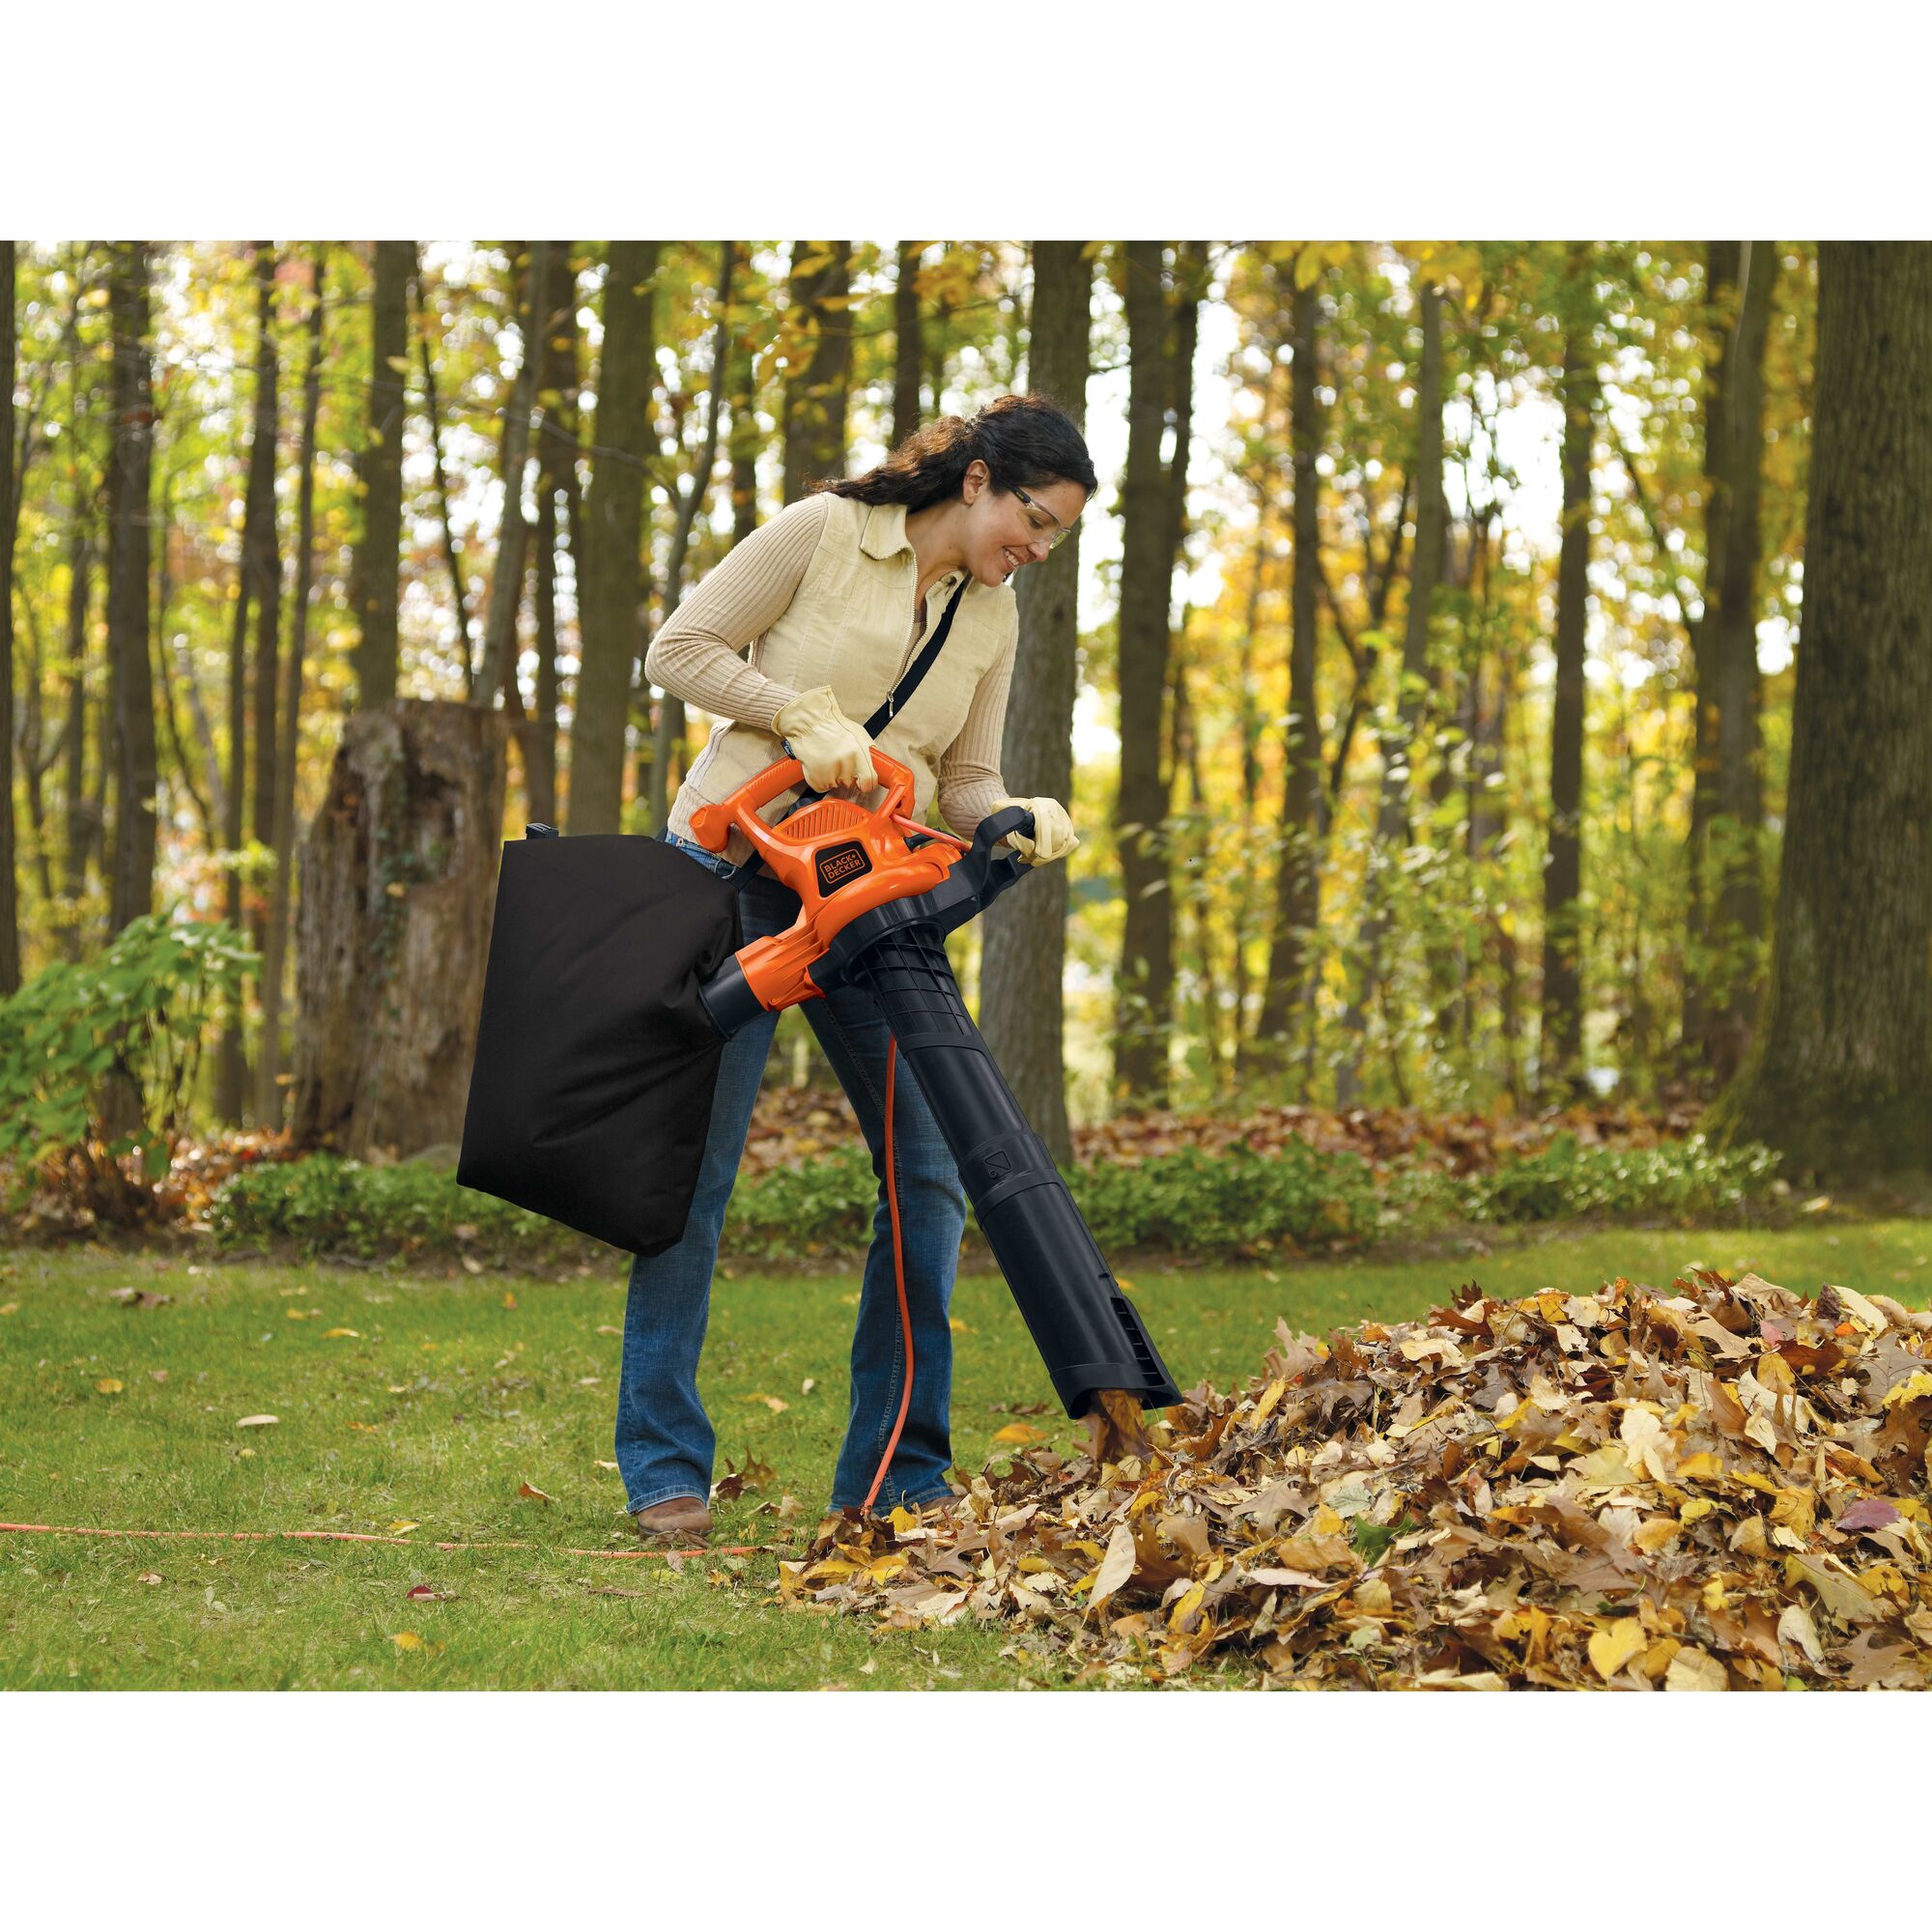 12 Ampere blower vacuum mulcher being used by a person to clean leaf debris.